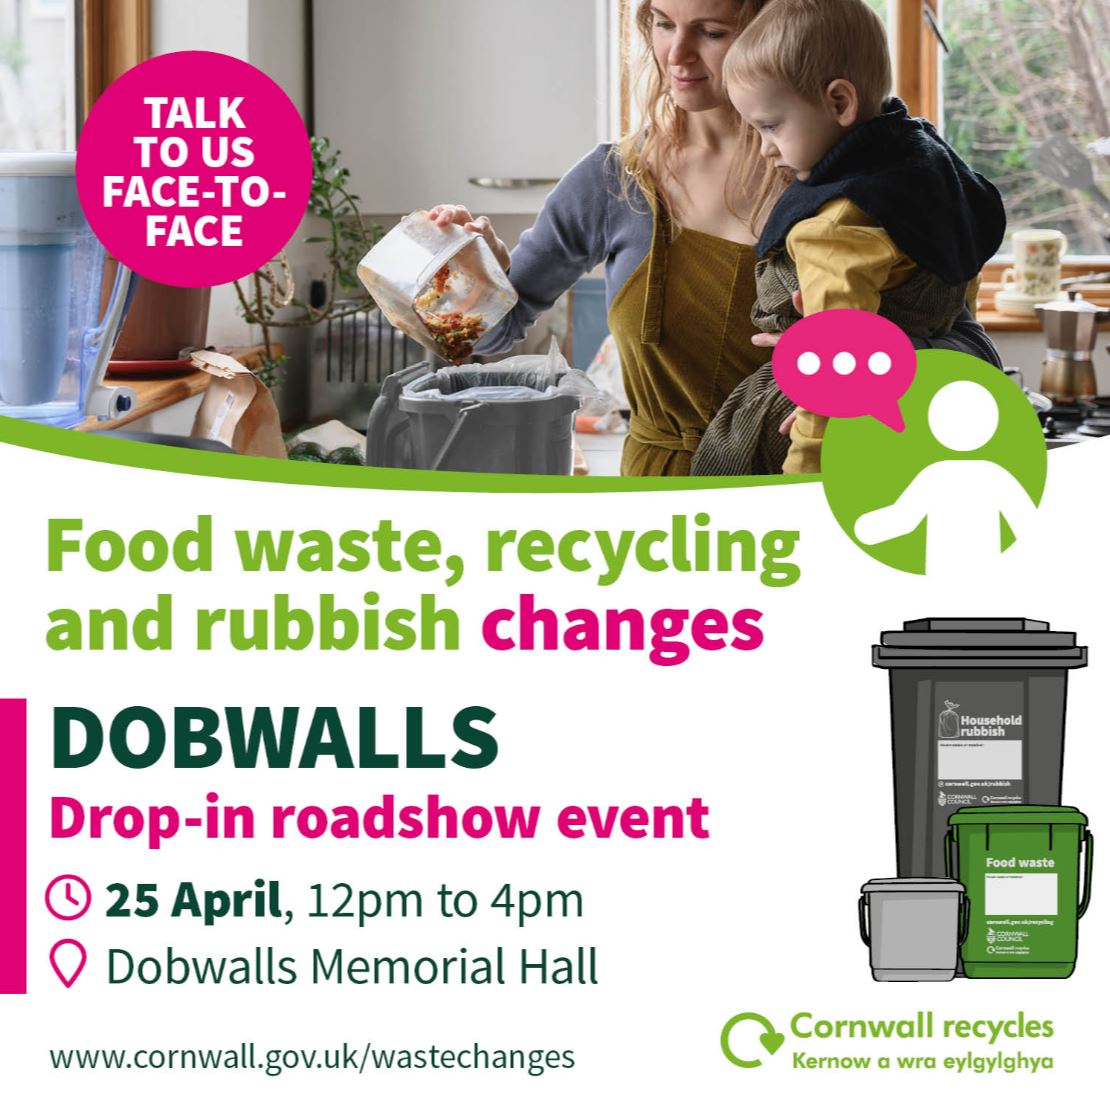 📢 Live in Dobwalls and want to find out more about the changes to your recycling, rubbish and food waste services? Then come along to our drop-in road show event next week. 🗓️ Thursday, April 25 ⏰ 12pm-4pm 📍 Dobwalls Memorial Hall, PL14 6LS.